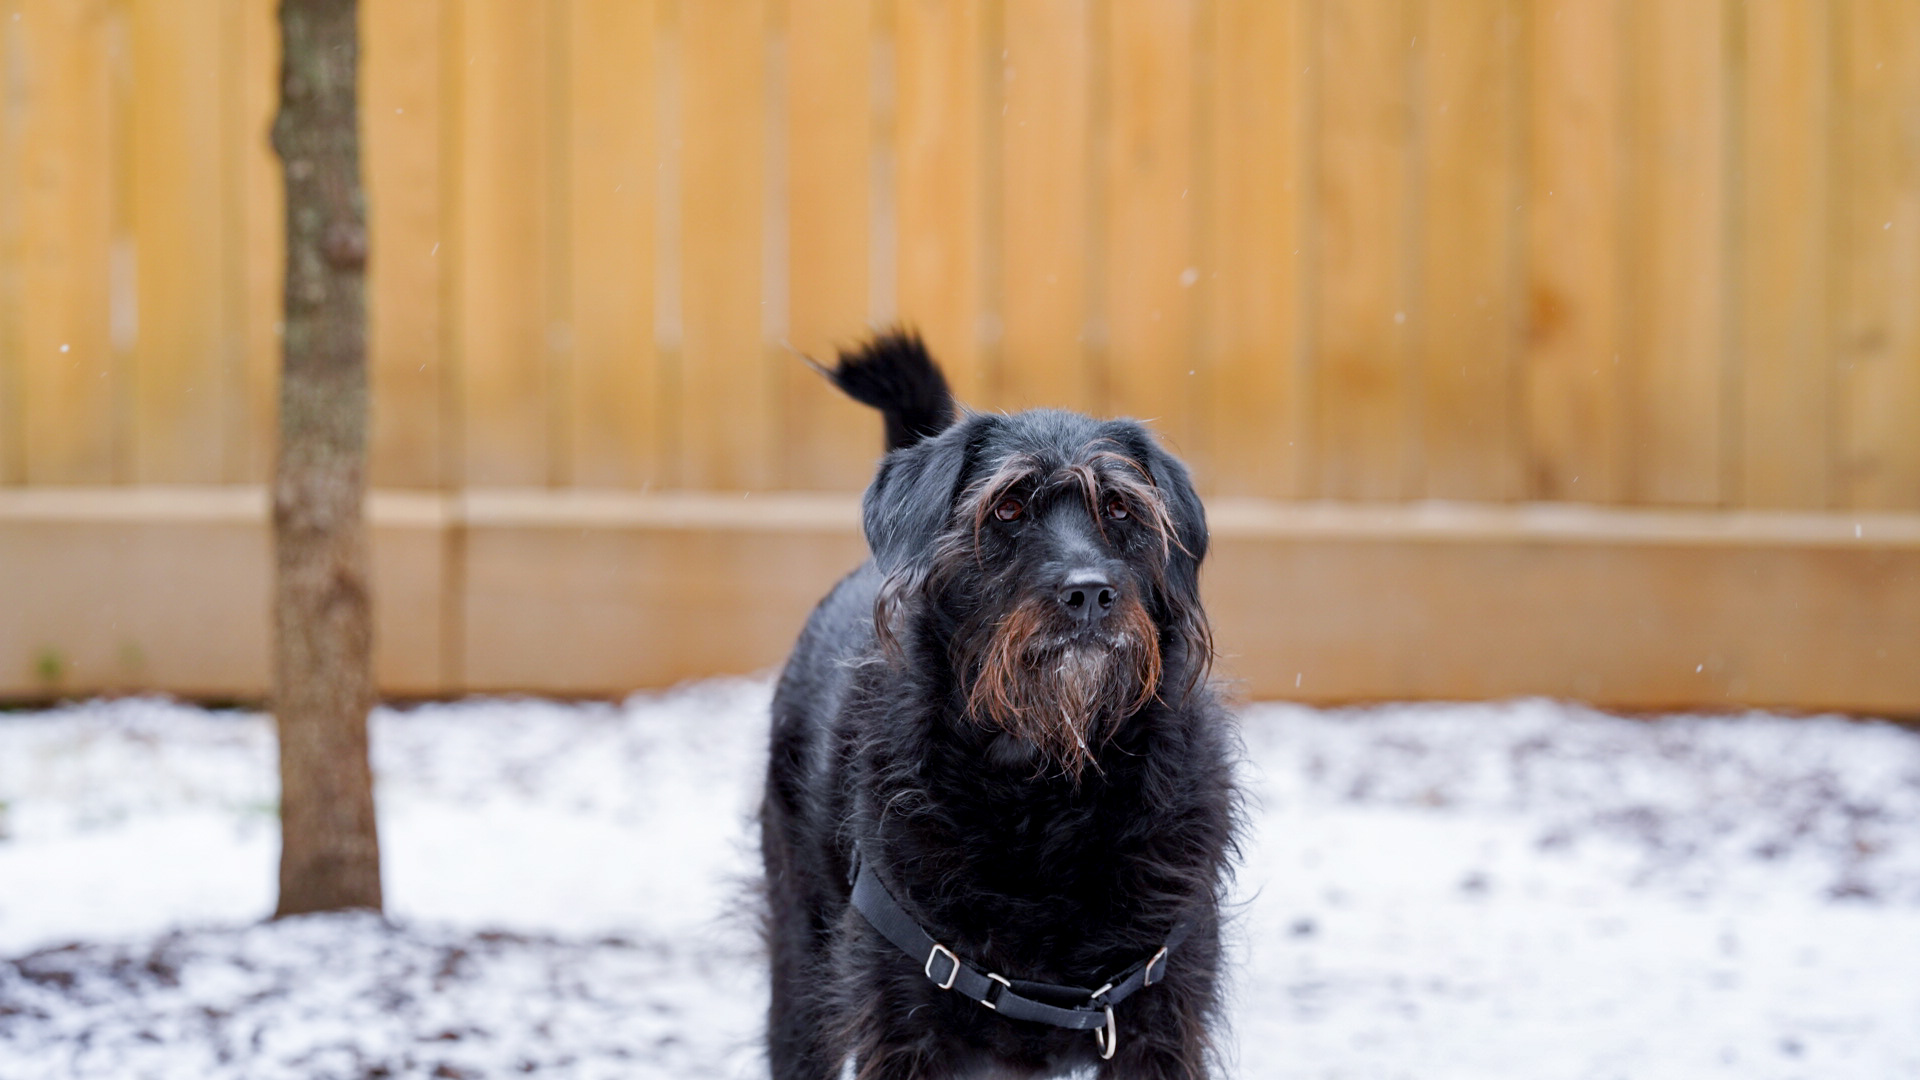 Ingrid the labradoodle during the winter storm.